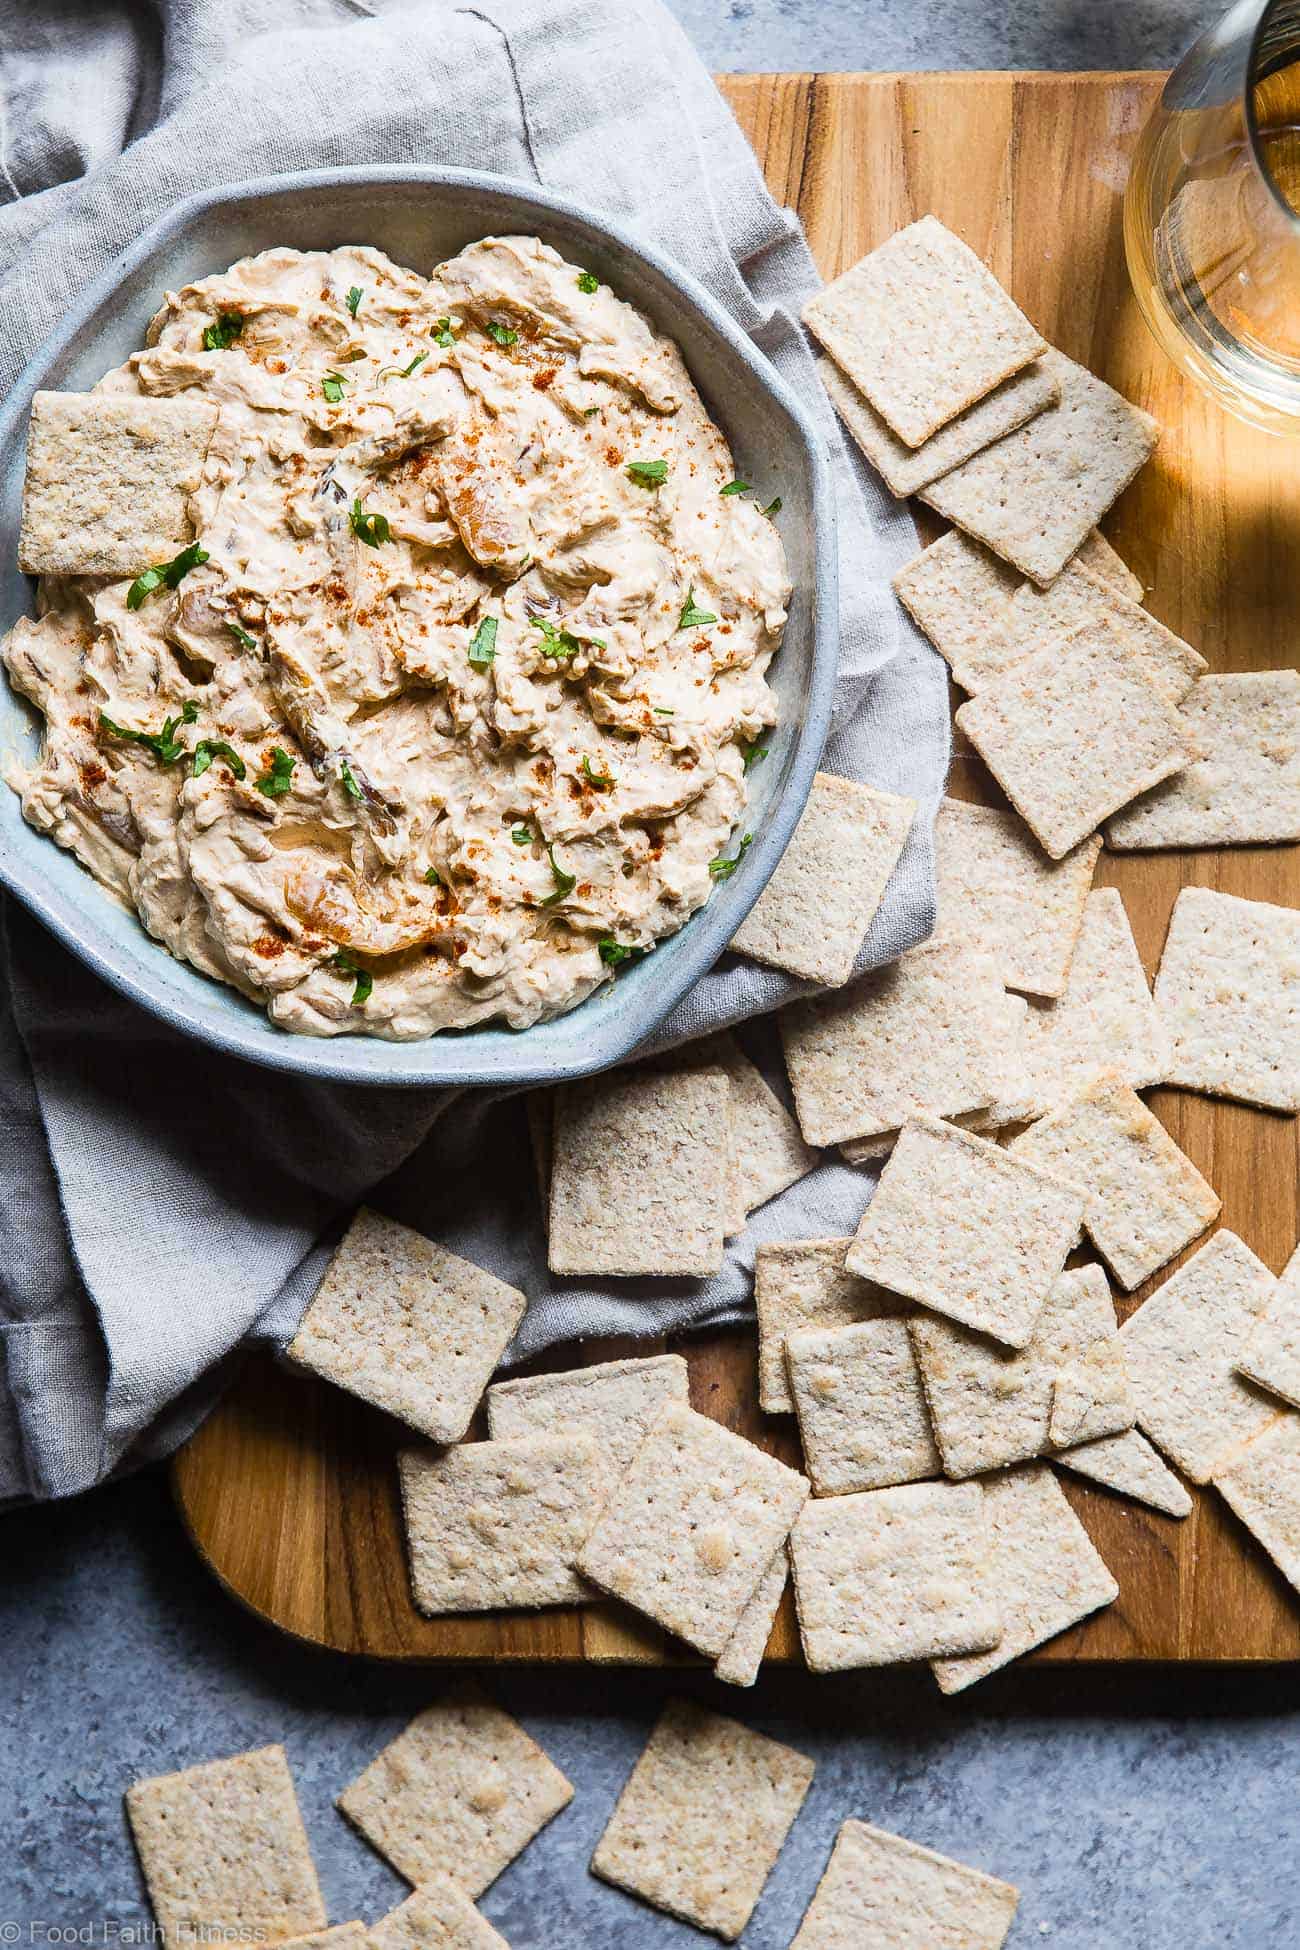 Easy Greek Yogurt French Onion Dip Recipe - This quick and easy homemade French onion dip is a healthy, low carb, gluten free and protein packed appetizer that is perfect for parties! Only 110 calories and so creamy! | Foodfaithfitness.com | @FoodFaithFit